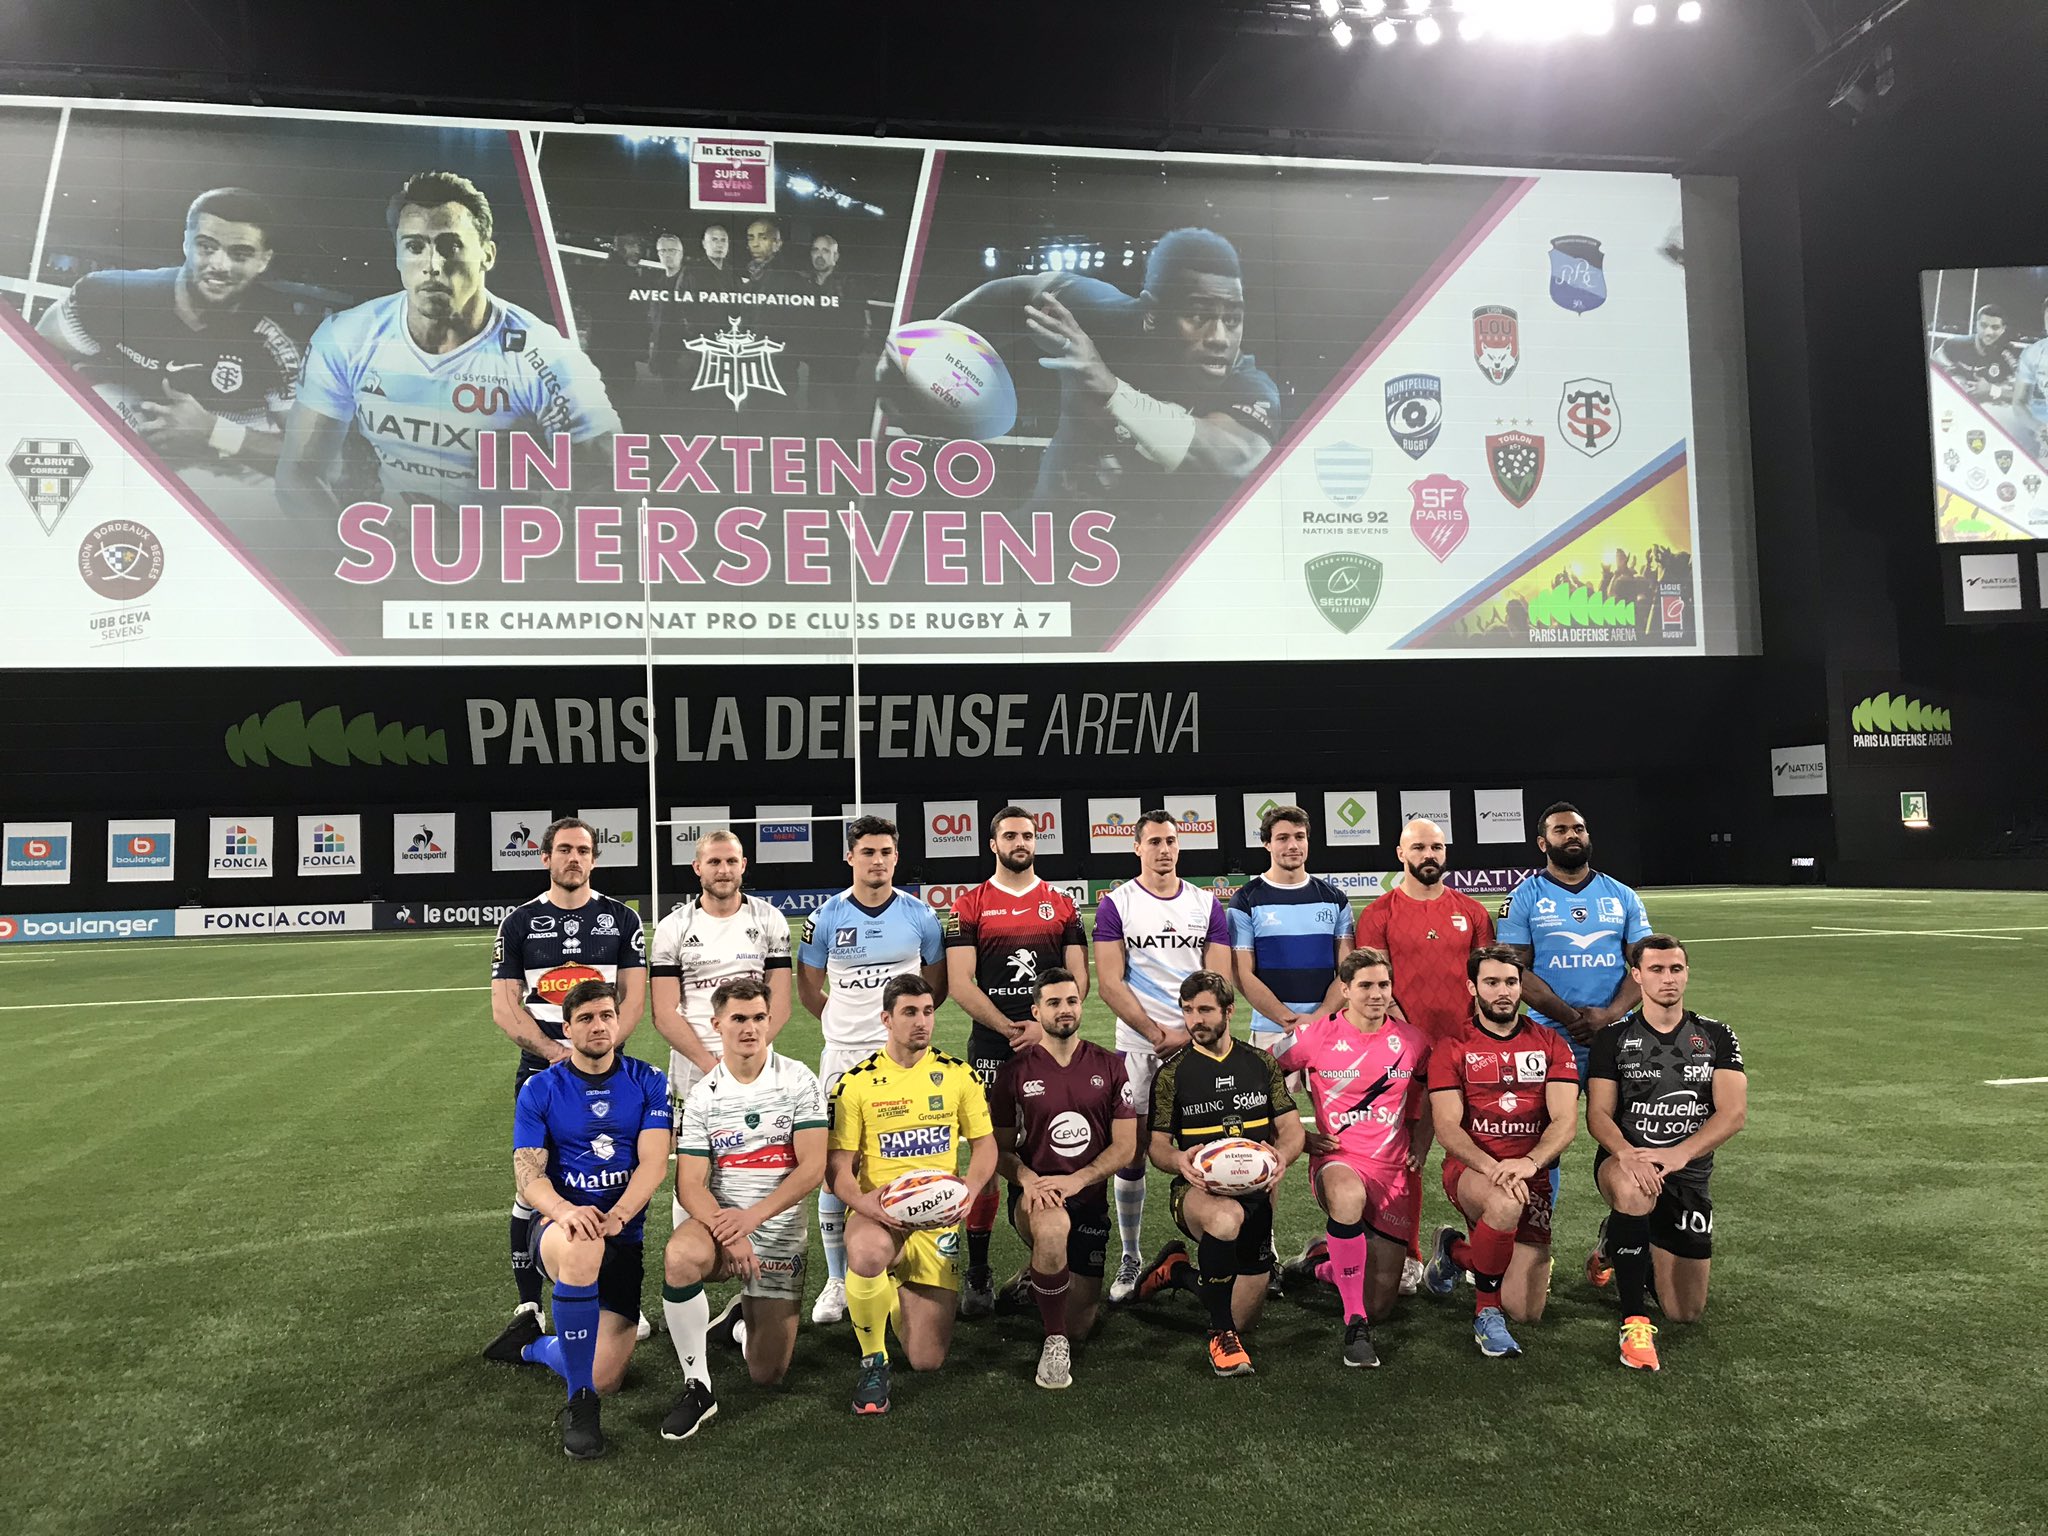 Supersevens - In Extenso- rugby sevens - rugby à sept - 7s